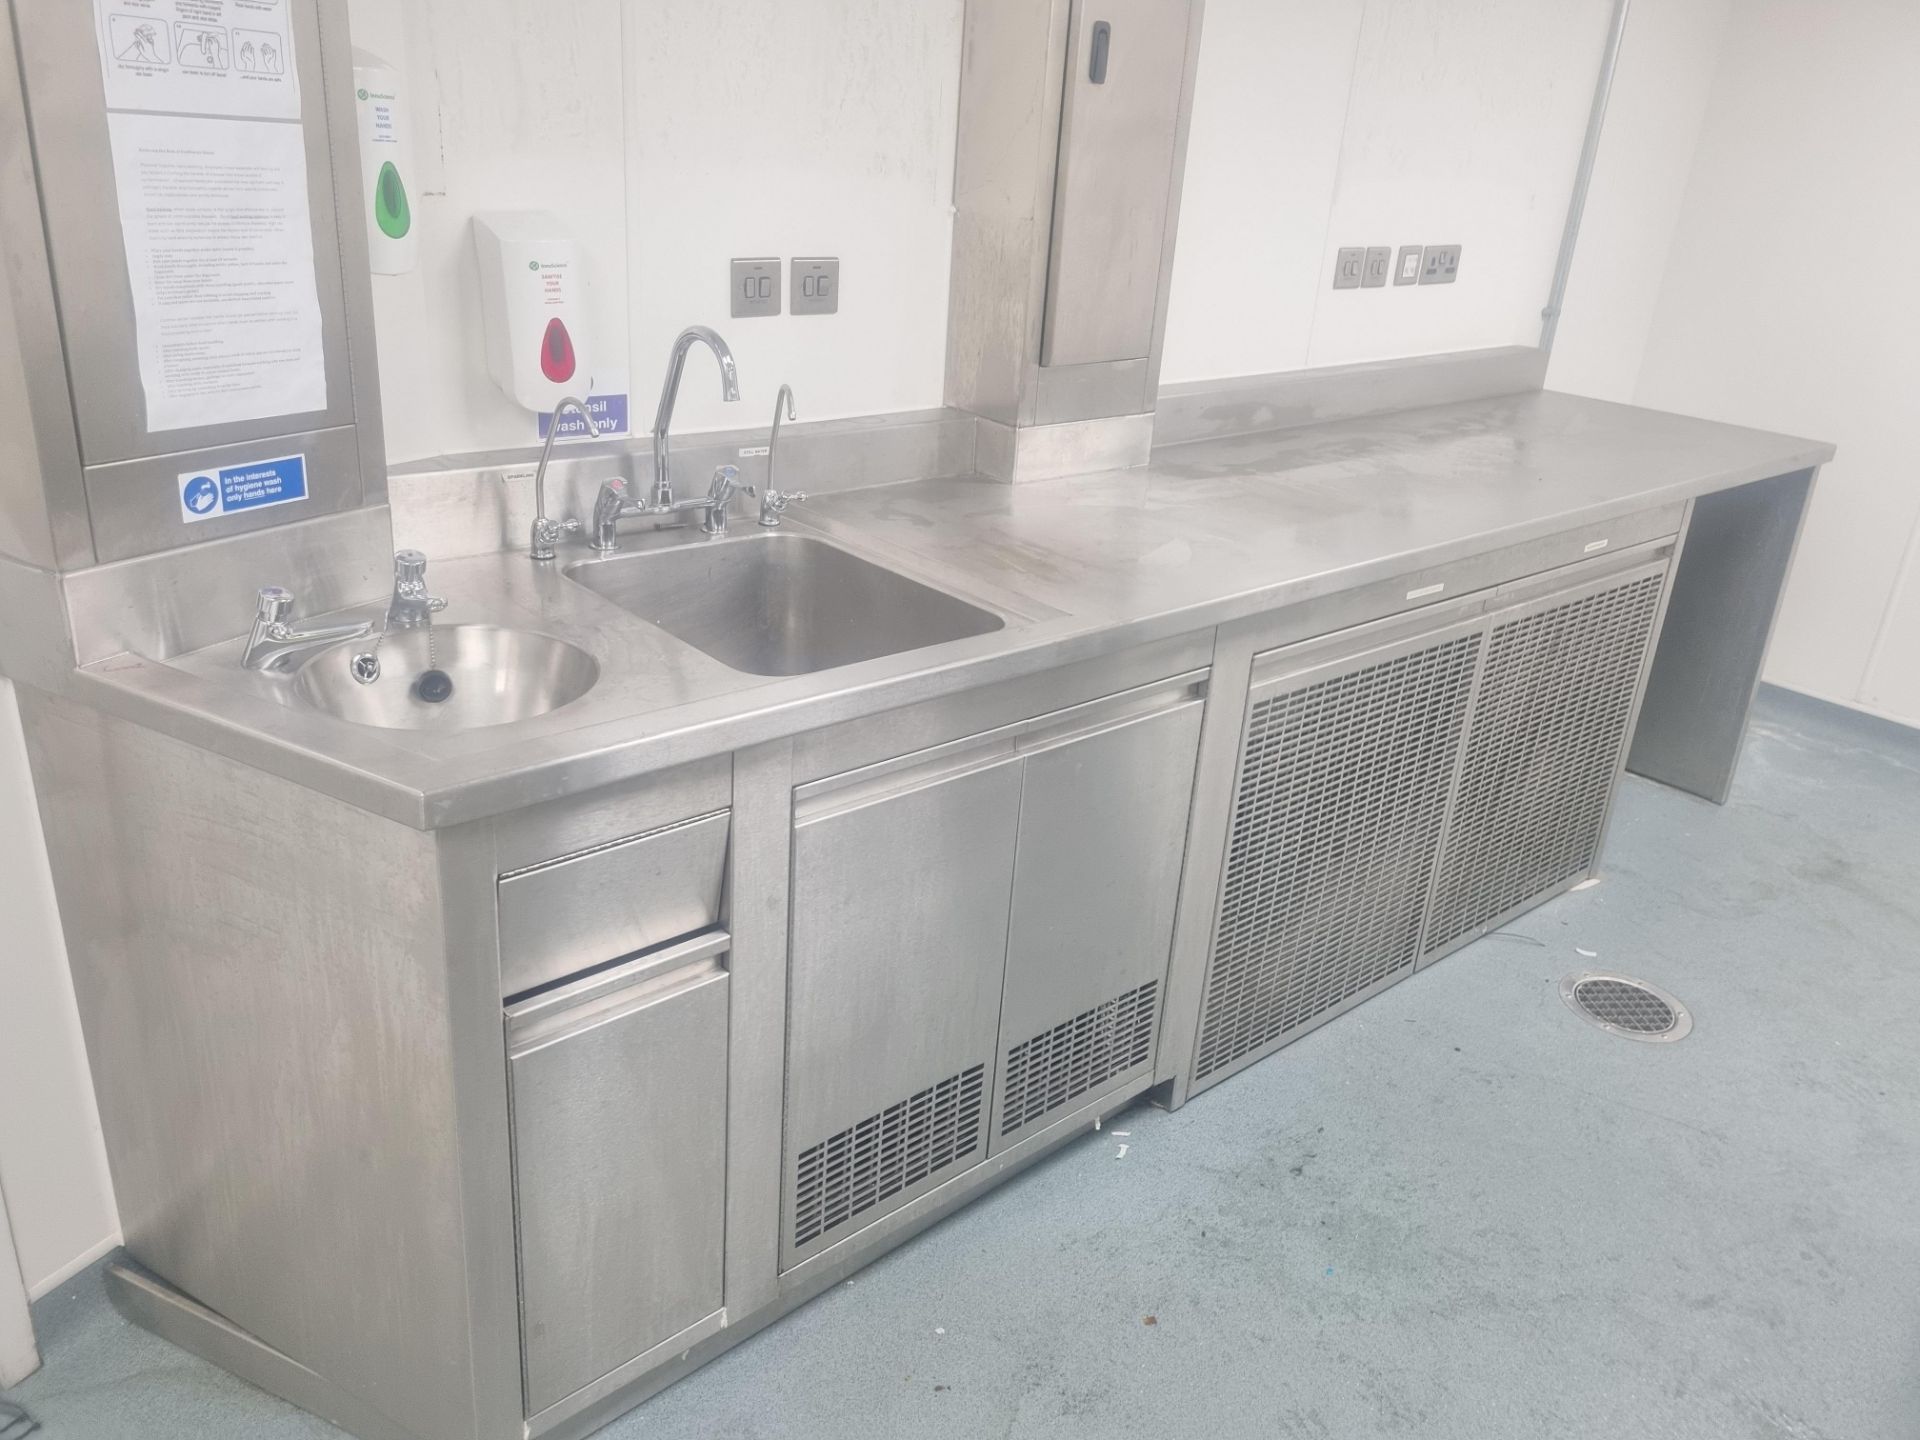 Commercial stainless steel work surface complete with utensil sink, hand wash basin Pentair Everpure